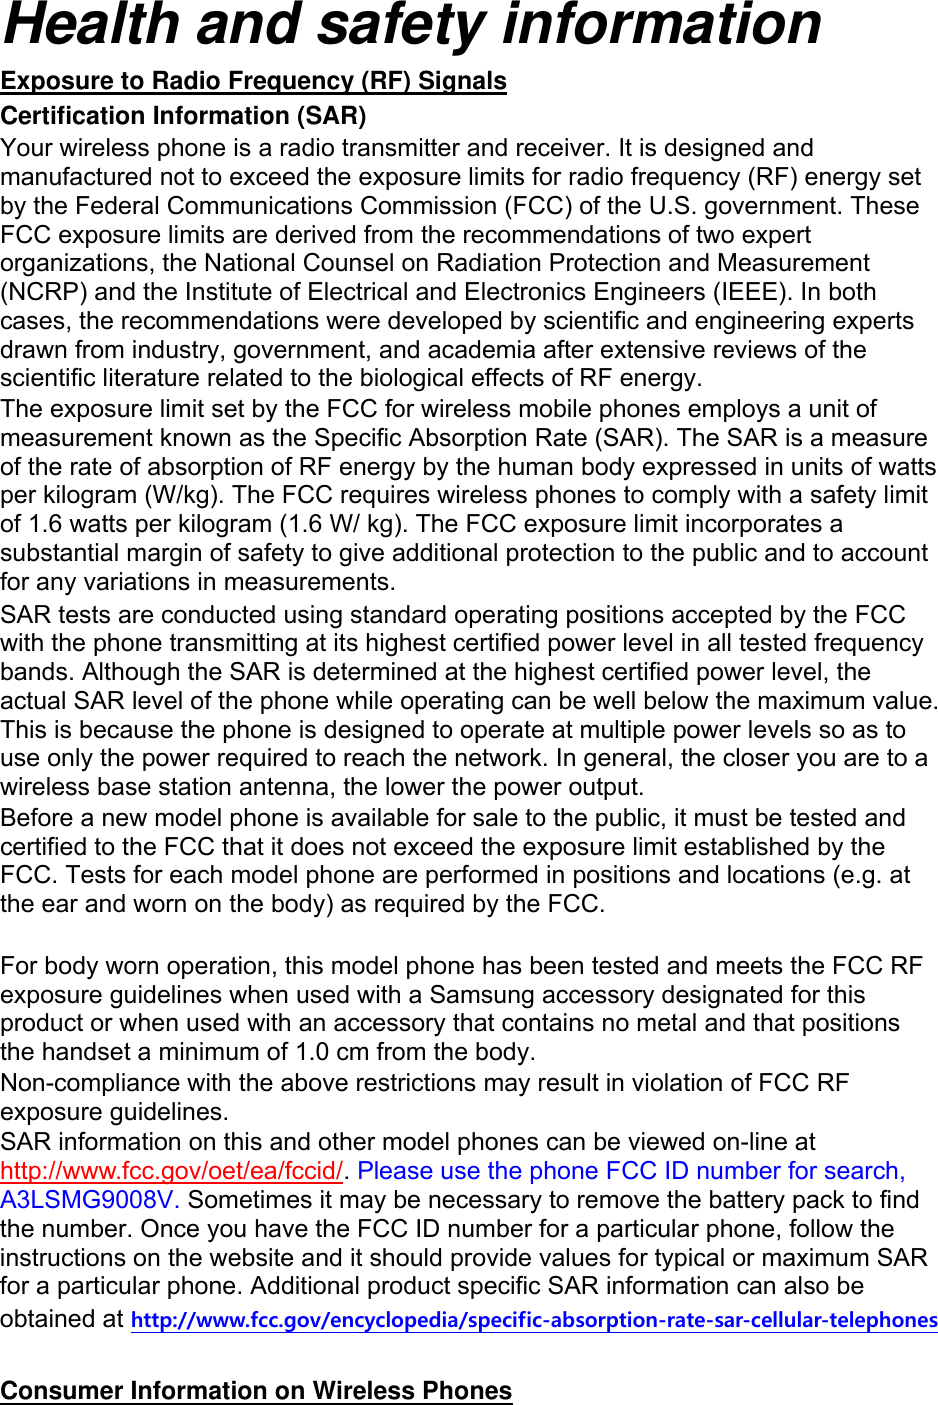 Health and safety information Exposure to Radio Frequency (RF) Signals Certification Information (SAR) Your wireless phone is a radio transmitter and receiver. It is designed and manufactured not to exceed the exposure limits for radio frequency (RF) energy set by the Federal Communications Commission (FCC) of the U.S. government. These FCC exposure limits are derived from the recommendations of two expert organizations, the National Counsel on Radiation Protection and Measurement (NCRP) and the Institute of Electrical and Electronics Engineers (IEEE). In both cases, the recommendations were developed by scientific and engineering experts drawn from industry, government, and academia after extensive reviews of the scientific literature related to the biological effects of RF energy. The exposure limit set by the FCC for wireless mobile phones employs a unit of measurement known as the Specific Absorption Rate (SAR). The SAR is a measure of the rate of absorption of RF energy by the human body expressed in units of watts per kilogram (W/kg). The FCC requires wireless phones to comply with a safety limit of 1.6 watts per kilogram (1.6 W/ kg). The FCC exposure limit incorporates a substantial margin of safety to give additional protection to the public and to account for any variations in measurements. SAR tests are conducted using standard operating positions accepted by the FCC with the phone transmitting at its highest certified power level in all tested frequency bands. Although the SAR is determined at the highest certified power level, the actual SAR level of the phone while operating can be well below the maximum value. This is because the phone is designed to operate at multiple power levels so as to use only the power required to reach the network. In general, the closer you are to a wireless base station antenna, the lower the power output. Before a new model phone is available for sale to the public, it must be tested and certified to the FCC that it does not exceed the exposure limit established by the FCC. Tests for each model phone are performed in positions and locations (e.g. at the ear and worn on the body) as required by the FCC.      For body worn operation, this model phone has been tested and meets the FCC RF exposure guidelines when used with a Samsung accessory designated for this product or when used with an accessory that contains no metal and that positions the handset a minimum of 1.0 cm from the body.   Non-compliance with the above restrictions may result in violation of FCC RF exposure guidelines. SAR information on this and other model phones can be viewed on-line at http://www.fcc.gov/oet/ea/fccid/. Please use the phone FCC ID number for search, A3LSMG9008V. Sometimes it may be necessary to remove the battery pack to find the number. Once you have the FCC ID number for a particular phone, follow the instructions on the website and it should provide values for typical or maximum SAR for a particular phone. Additional product specific SAR information can also be obtained at http://www.fcc.gov/encyclopedia/specific-absorption-rate-sar-cellular-telephones  Consumer Information on Wireless Phones 